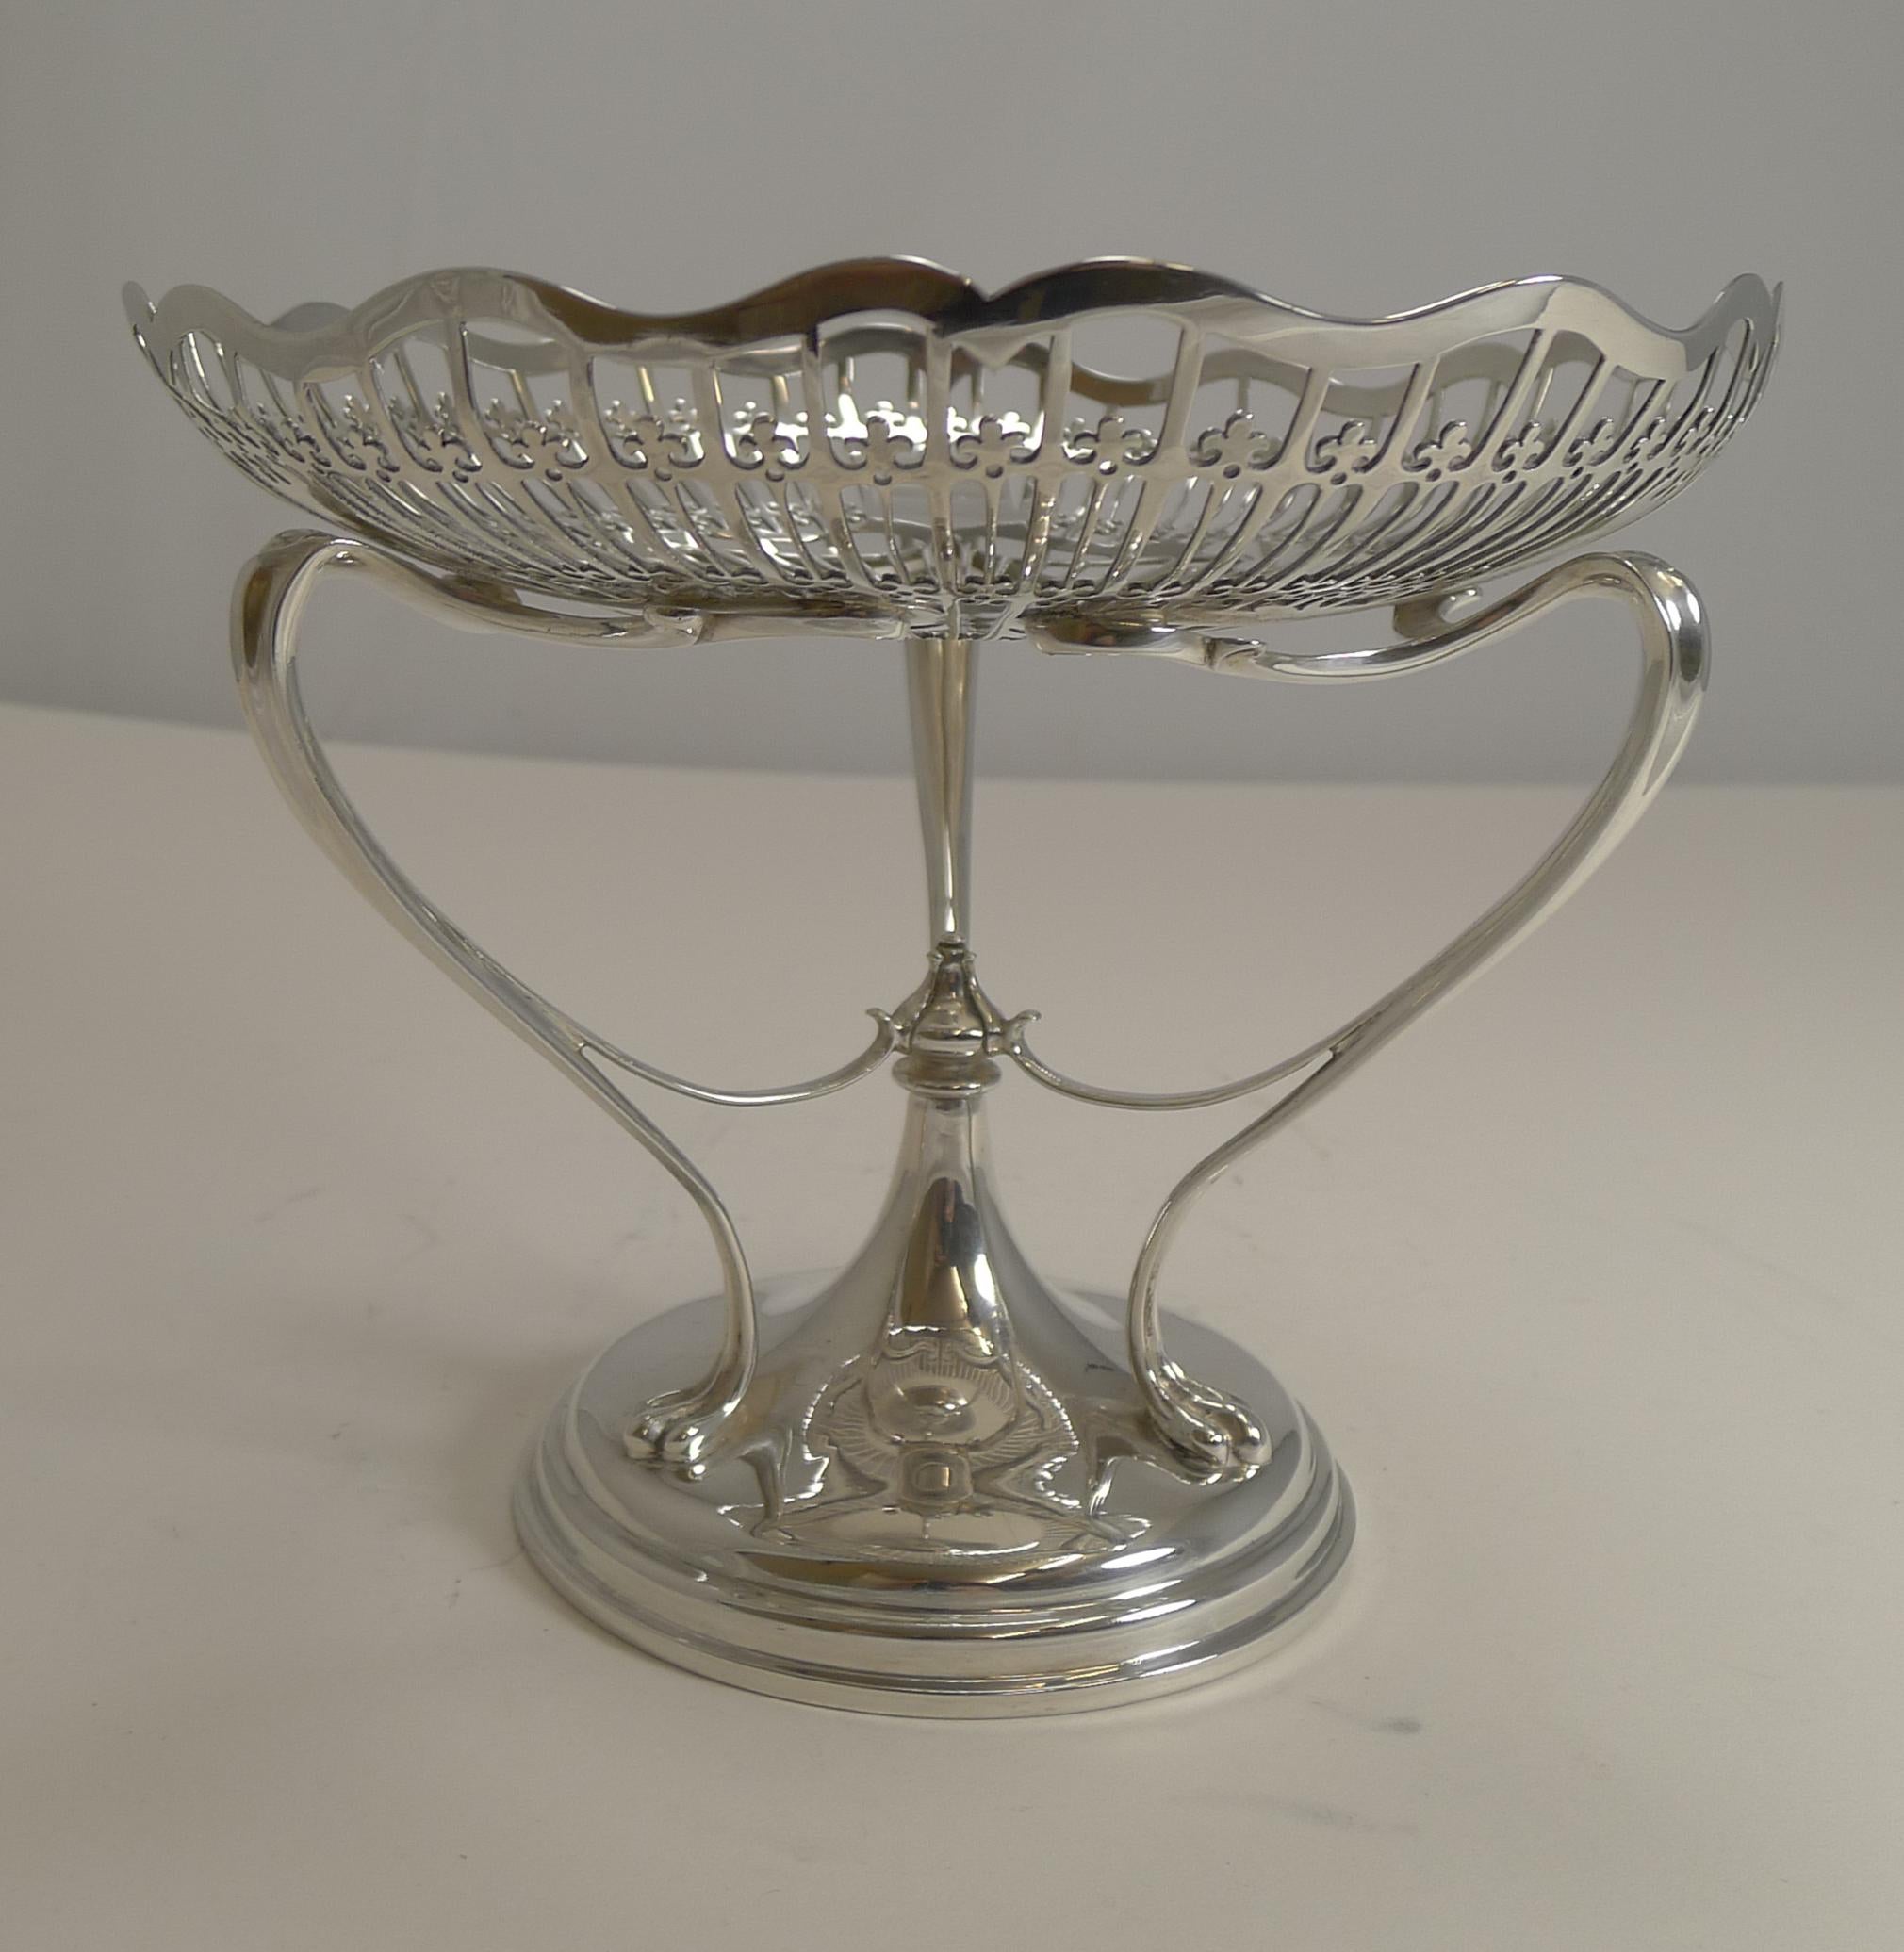 Early 20th Century Antique English Sterling Silver Art Nouveau Reticulated Tazza / Bowl / Comport For Sale